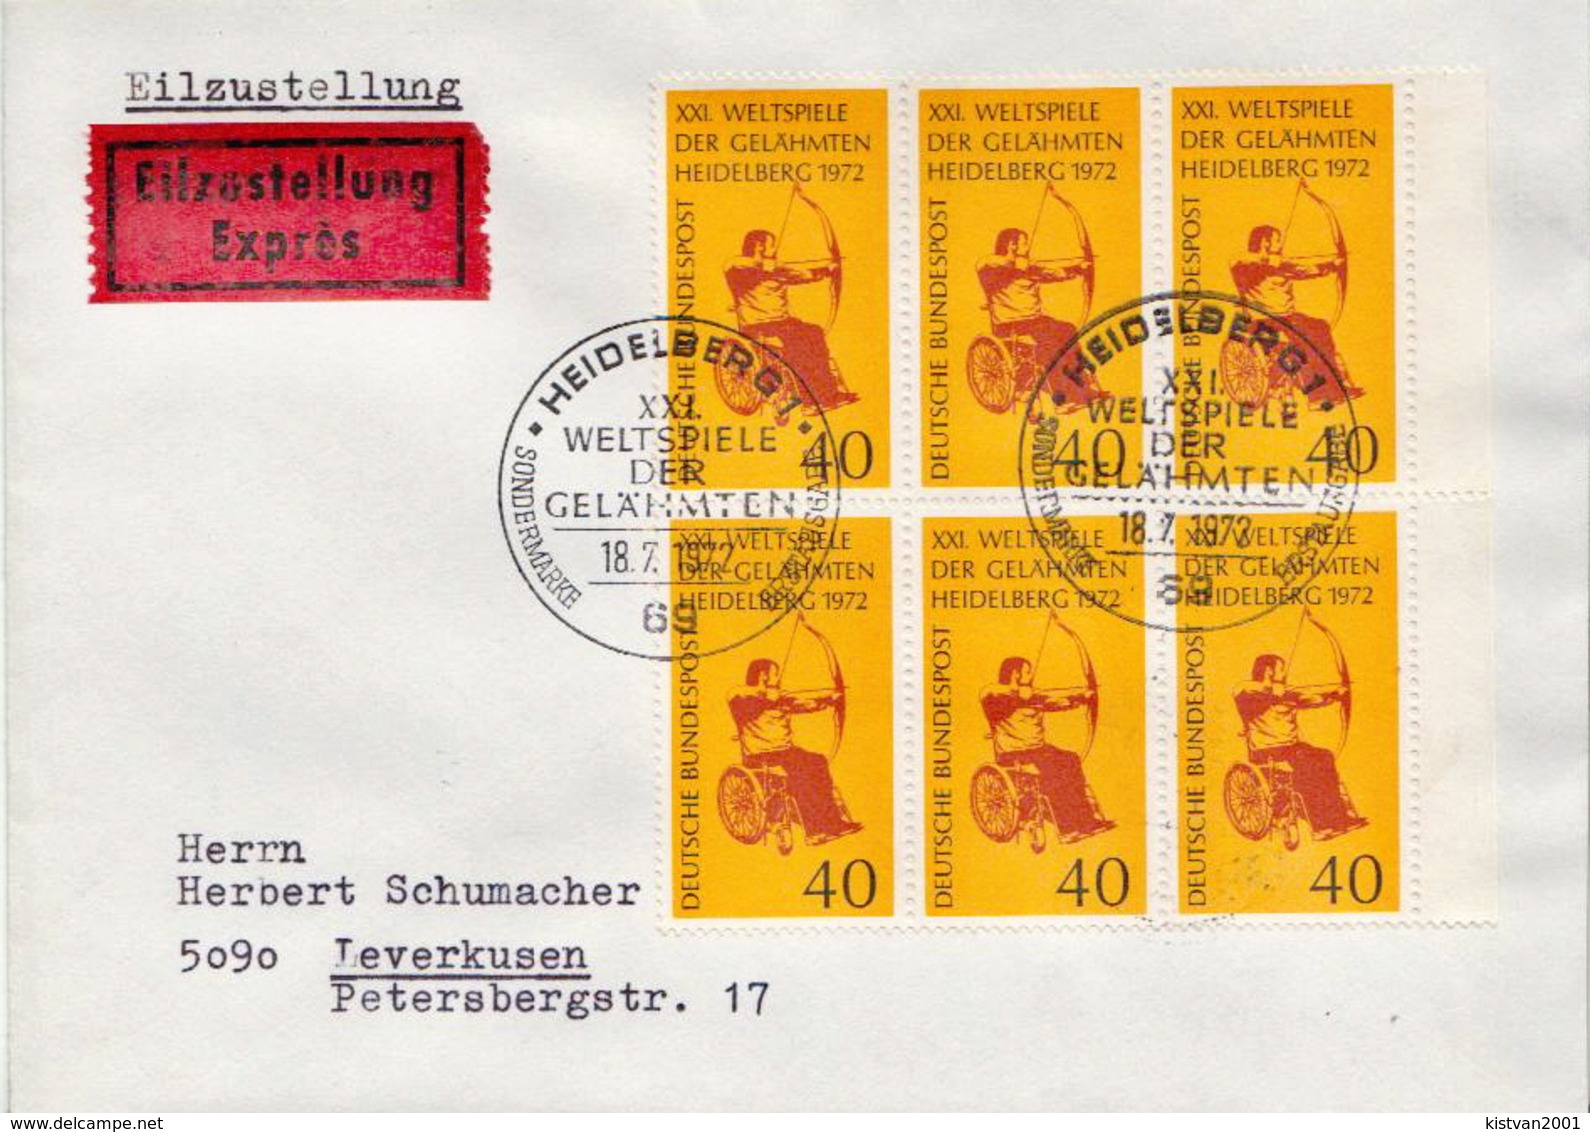 Postal History Cover: Germany Stamps On Express Cover - Archery